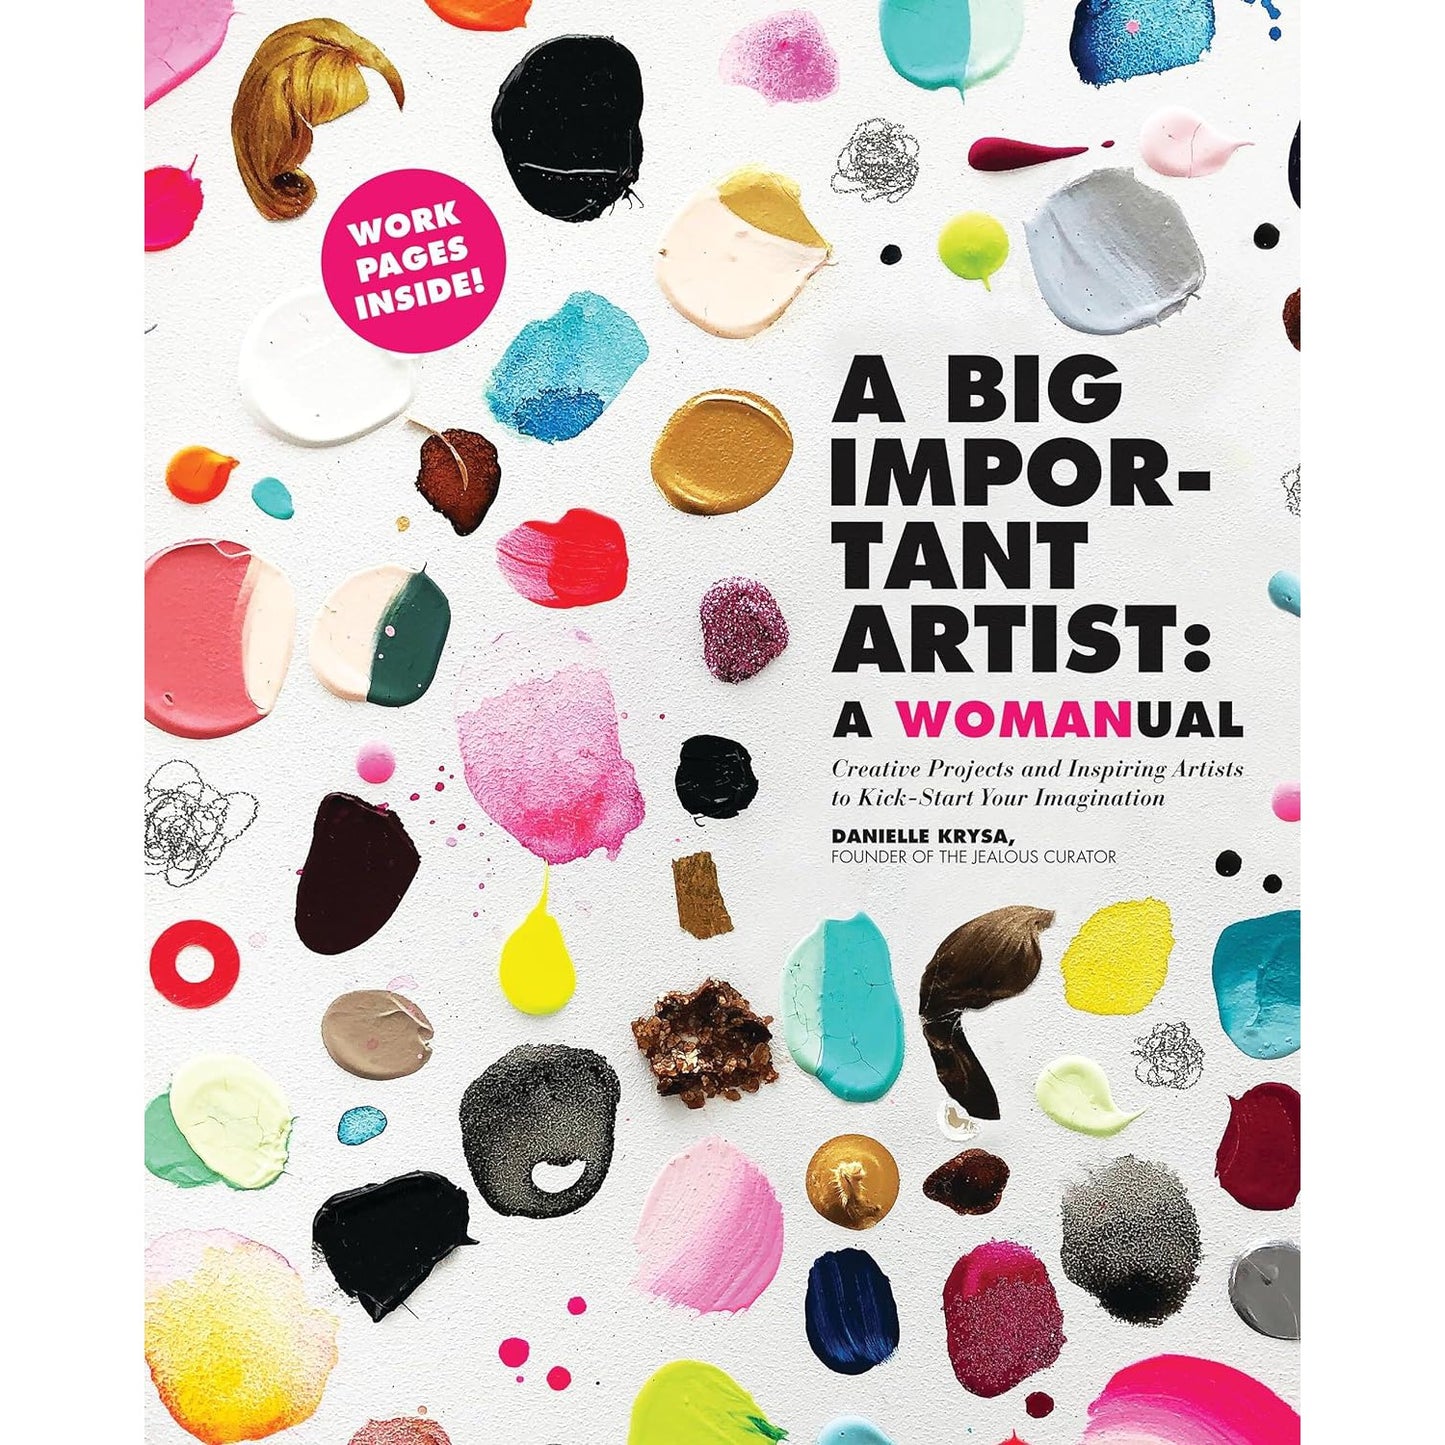 A Big Important Artist: A Womanual: Creative Projects and Inspiring Artists to Kick-Start Your Imagination